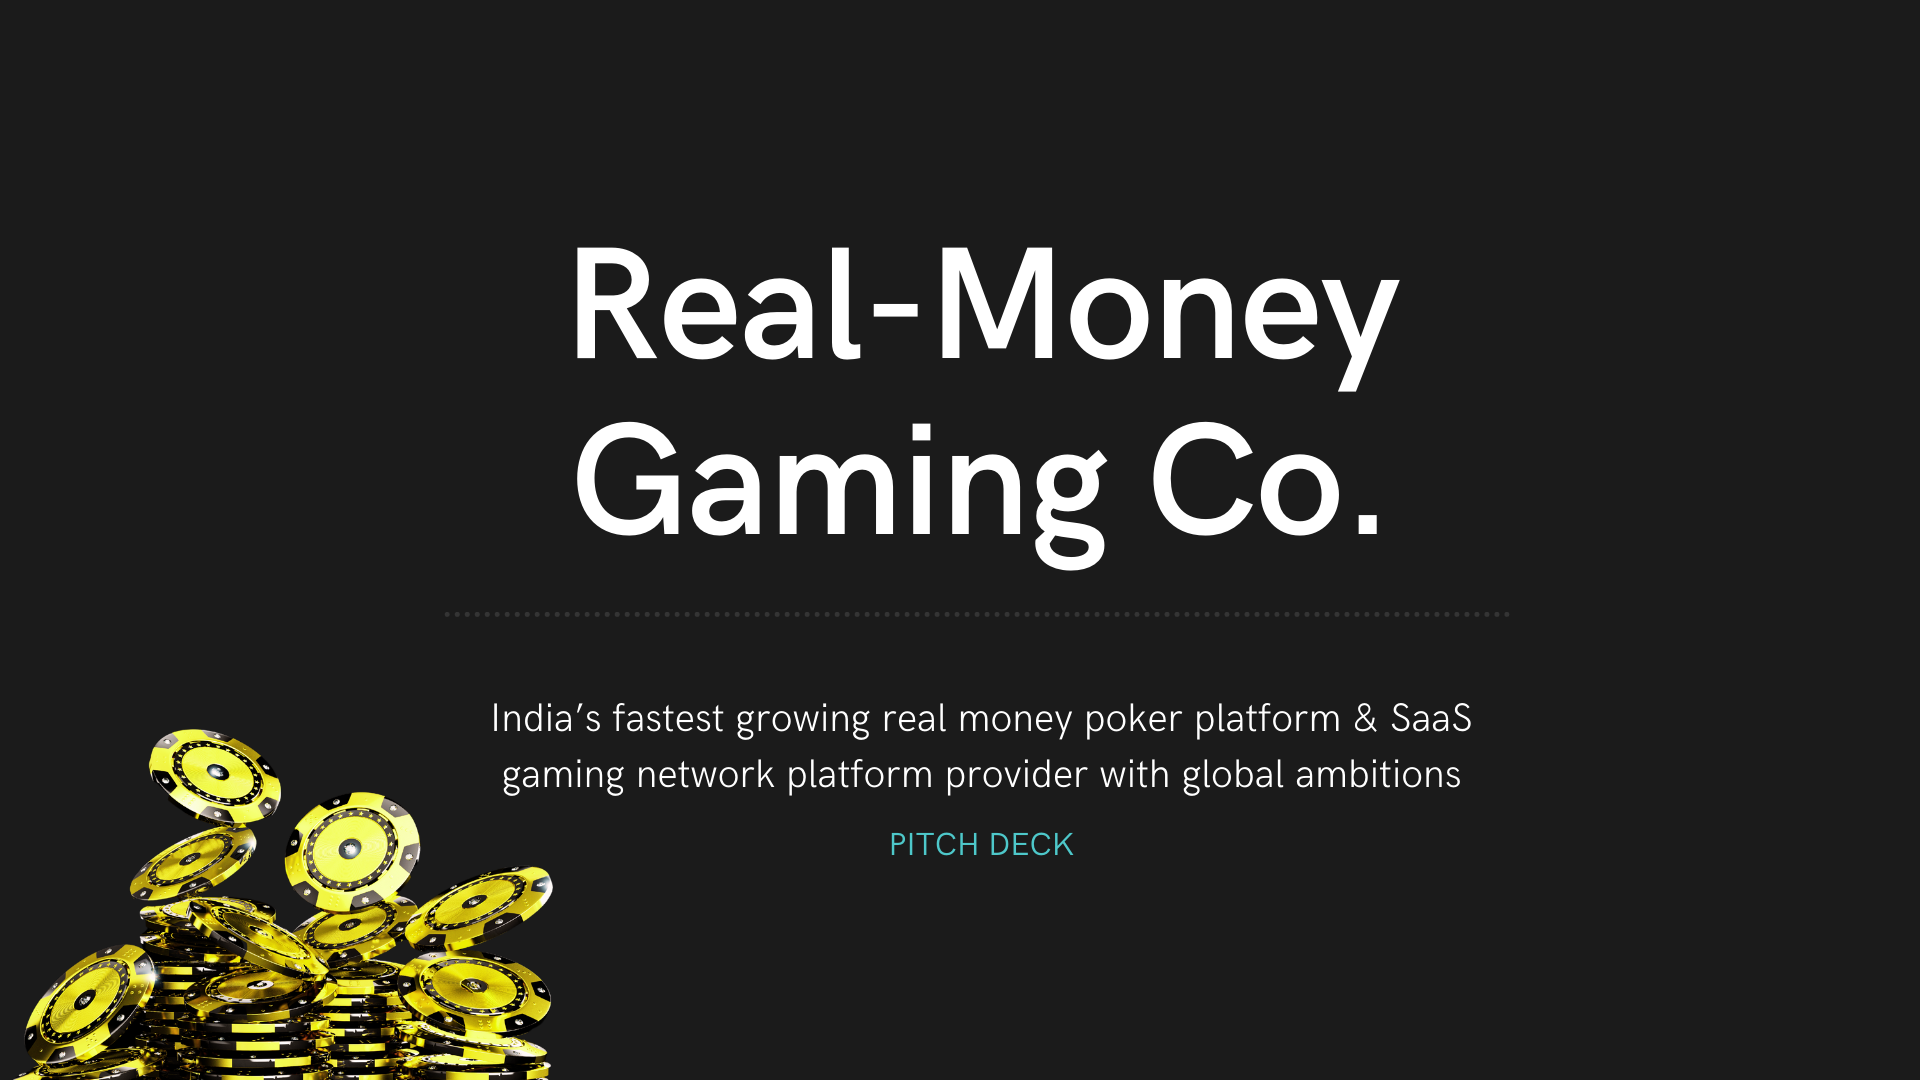 Real-Money Gaming Company - Pitch Deck